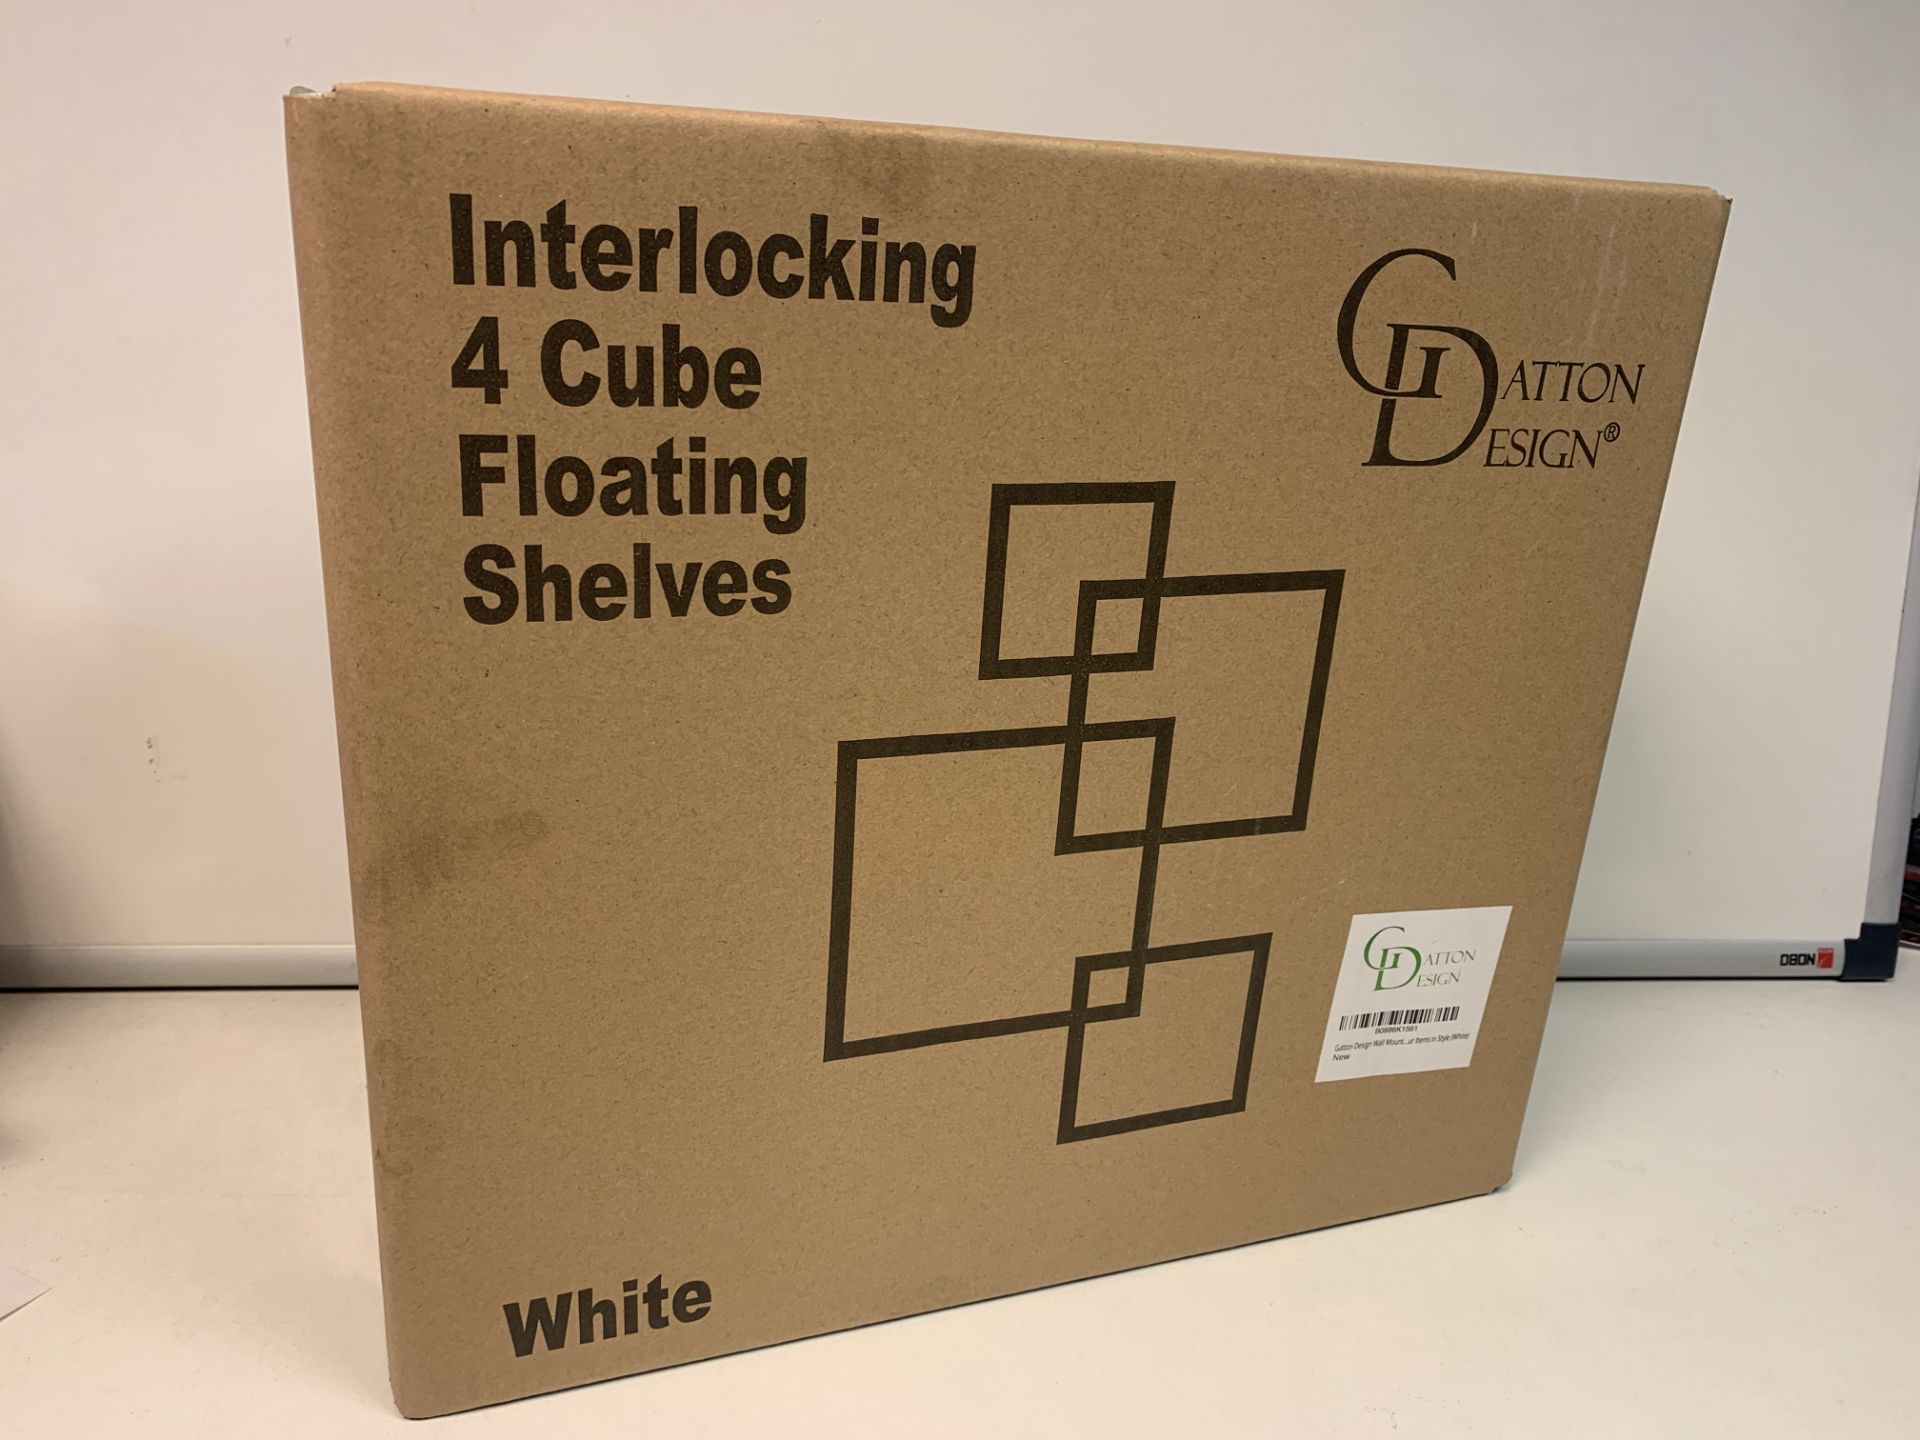 10 X NEW BOXED SETS OF GATTON DESIGN INTERLOCKING 4 CUBE FLOATING SHELVES IN WHITE. RRP £45 EACH SET